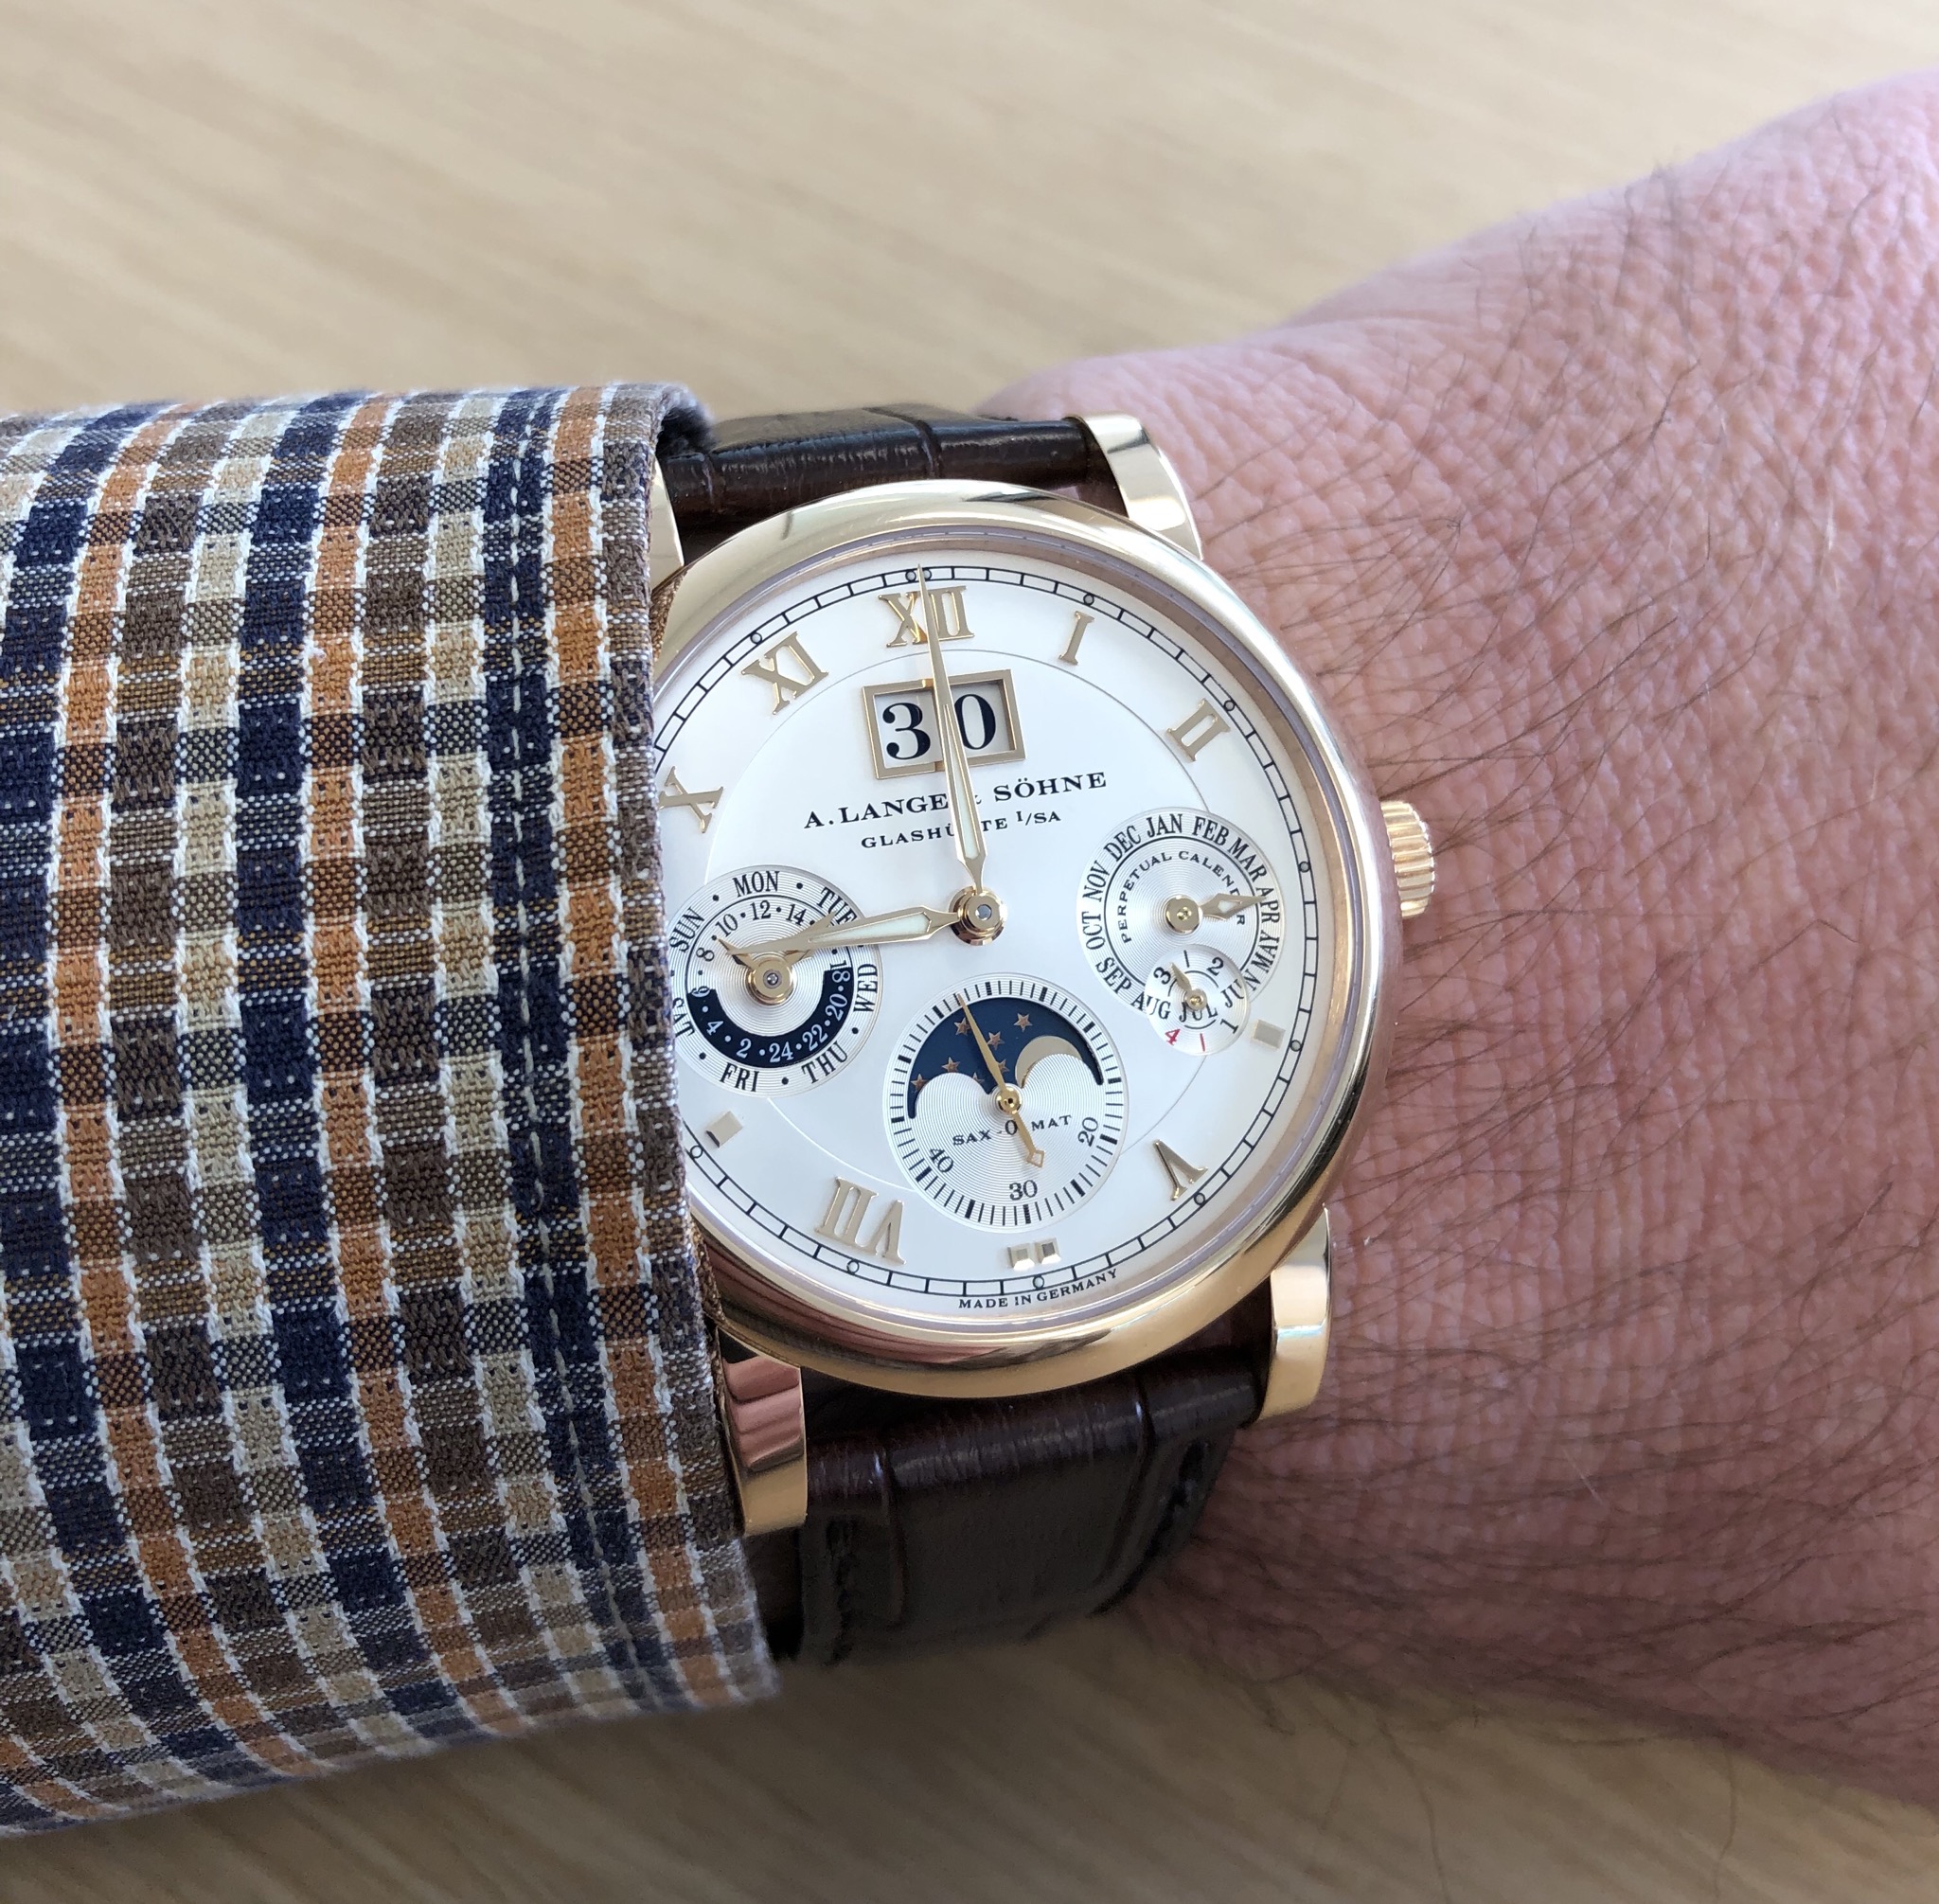 Let's see your mechanical watches | Page 9 | The Fedora Lounge